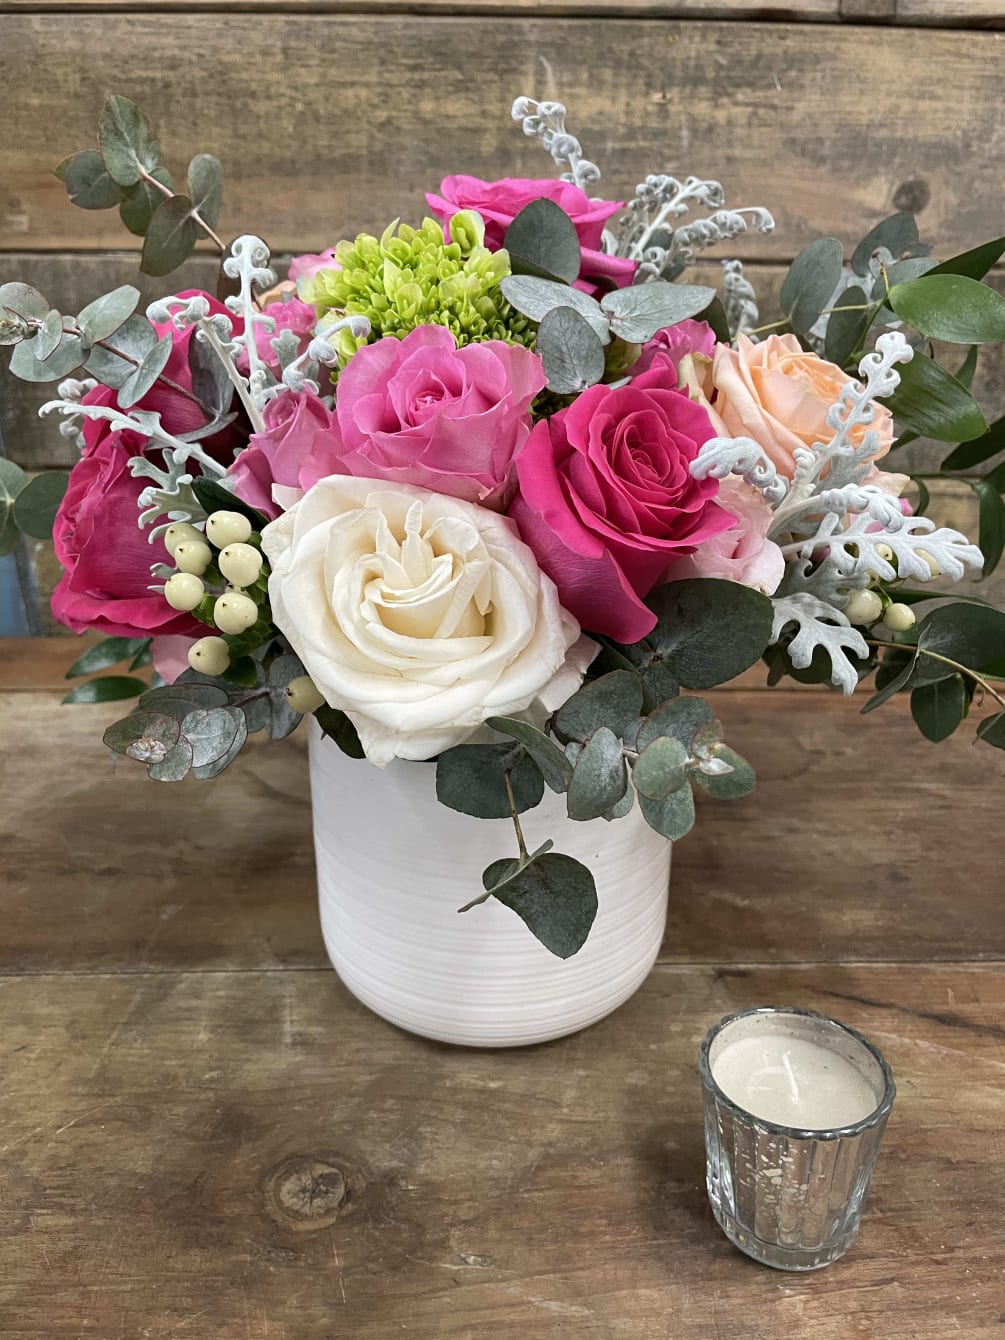 Roses, specialty greens designed to express appreciation for a special Mom or